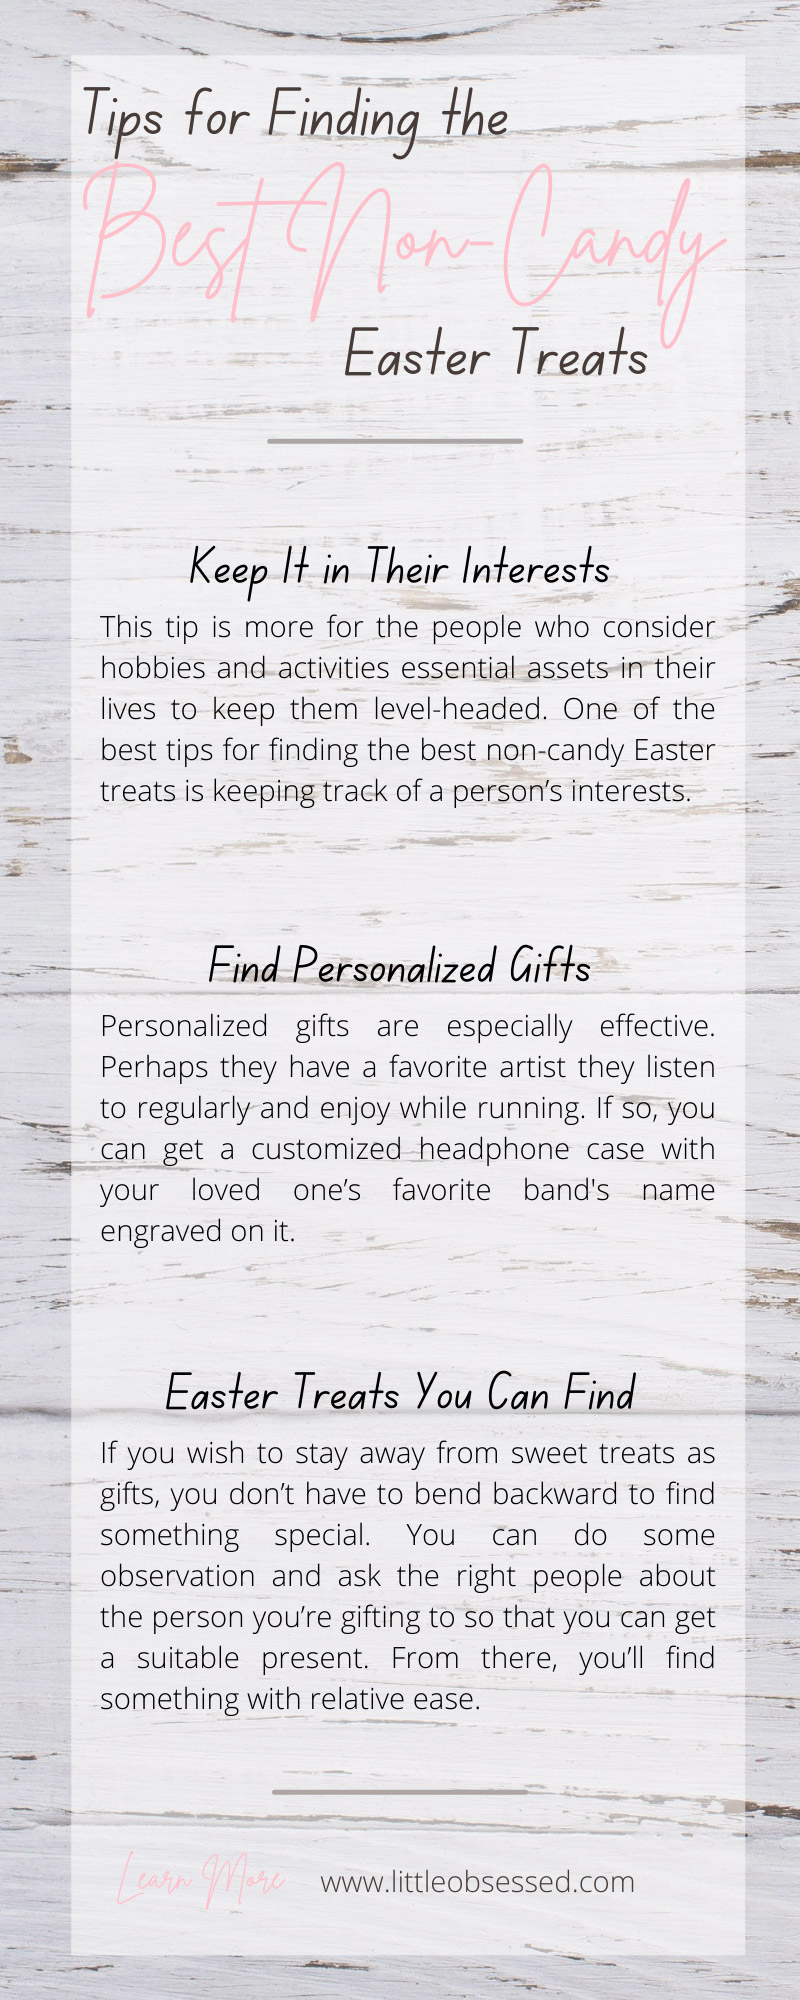 Tips for Finding the Best Non-Candy Easter Treats